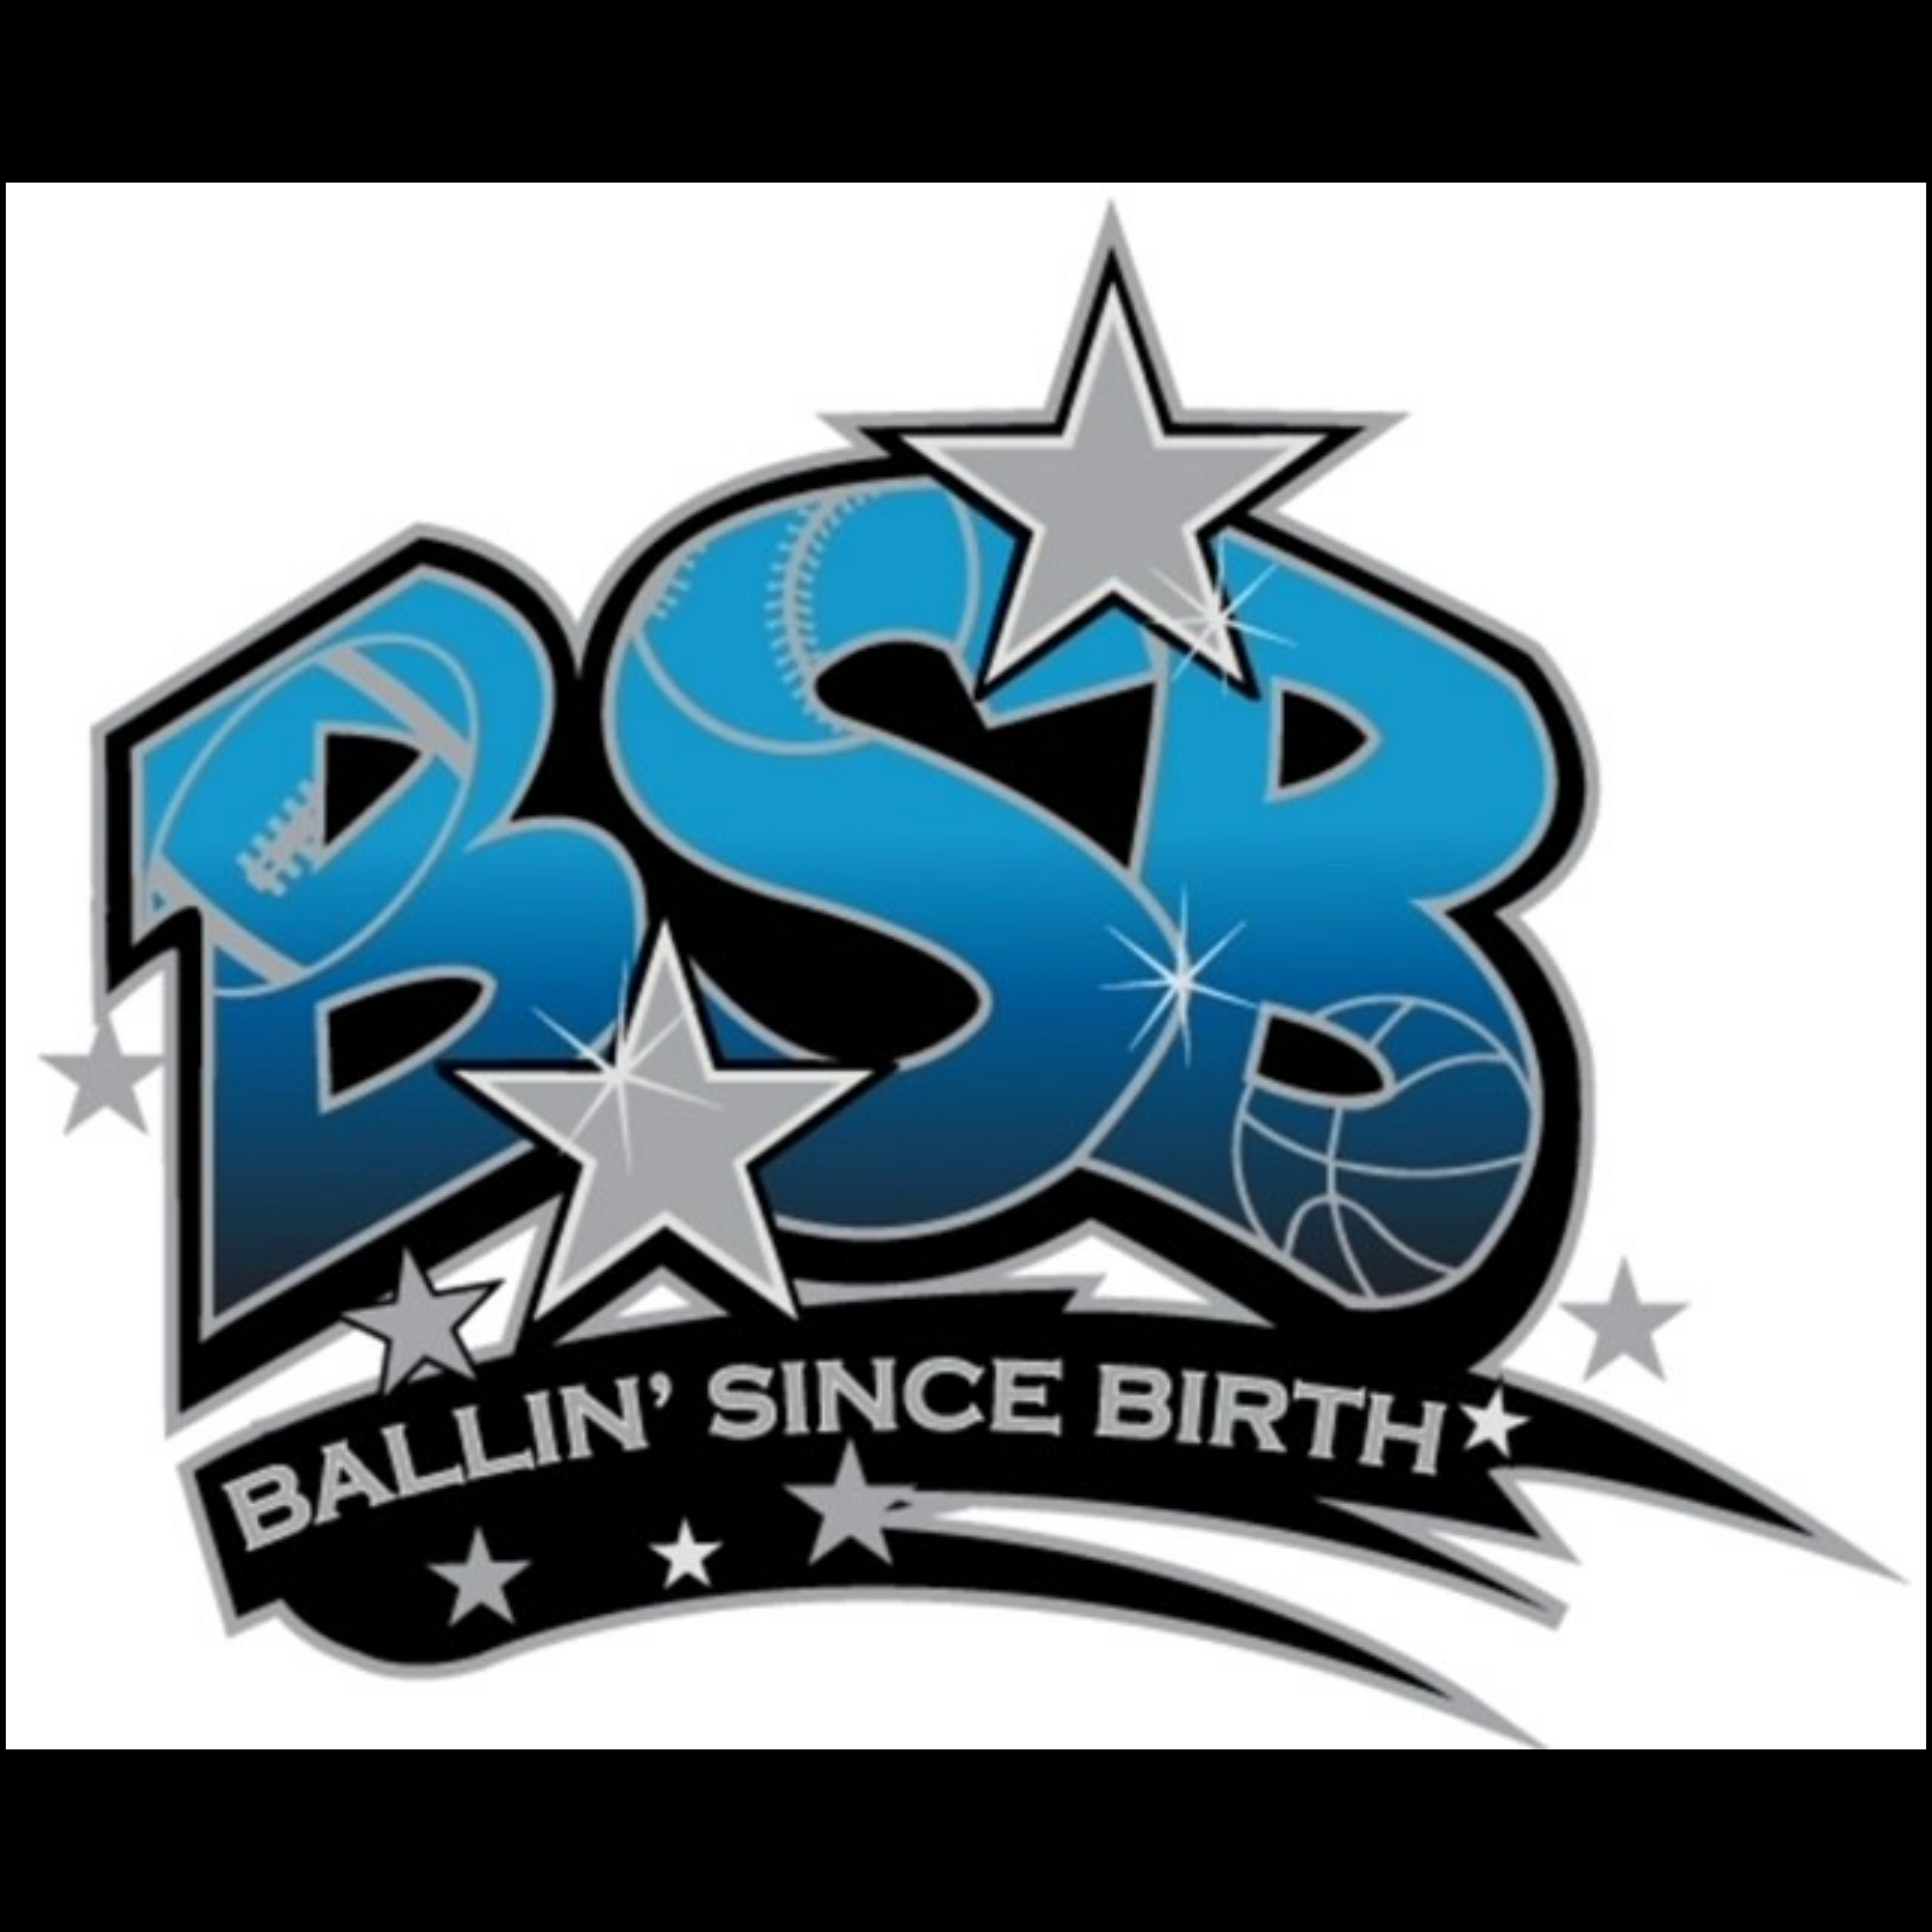 The official logo of Ballin Since Birth